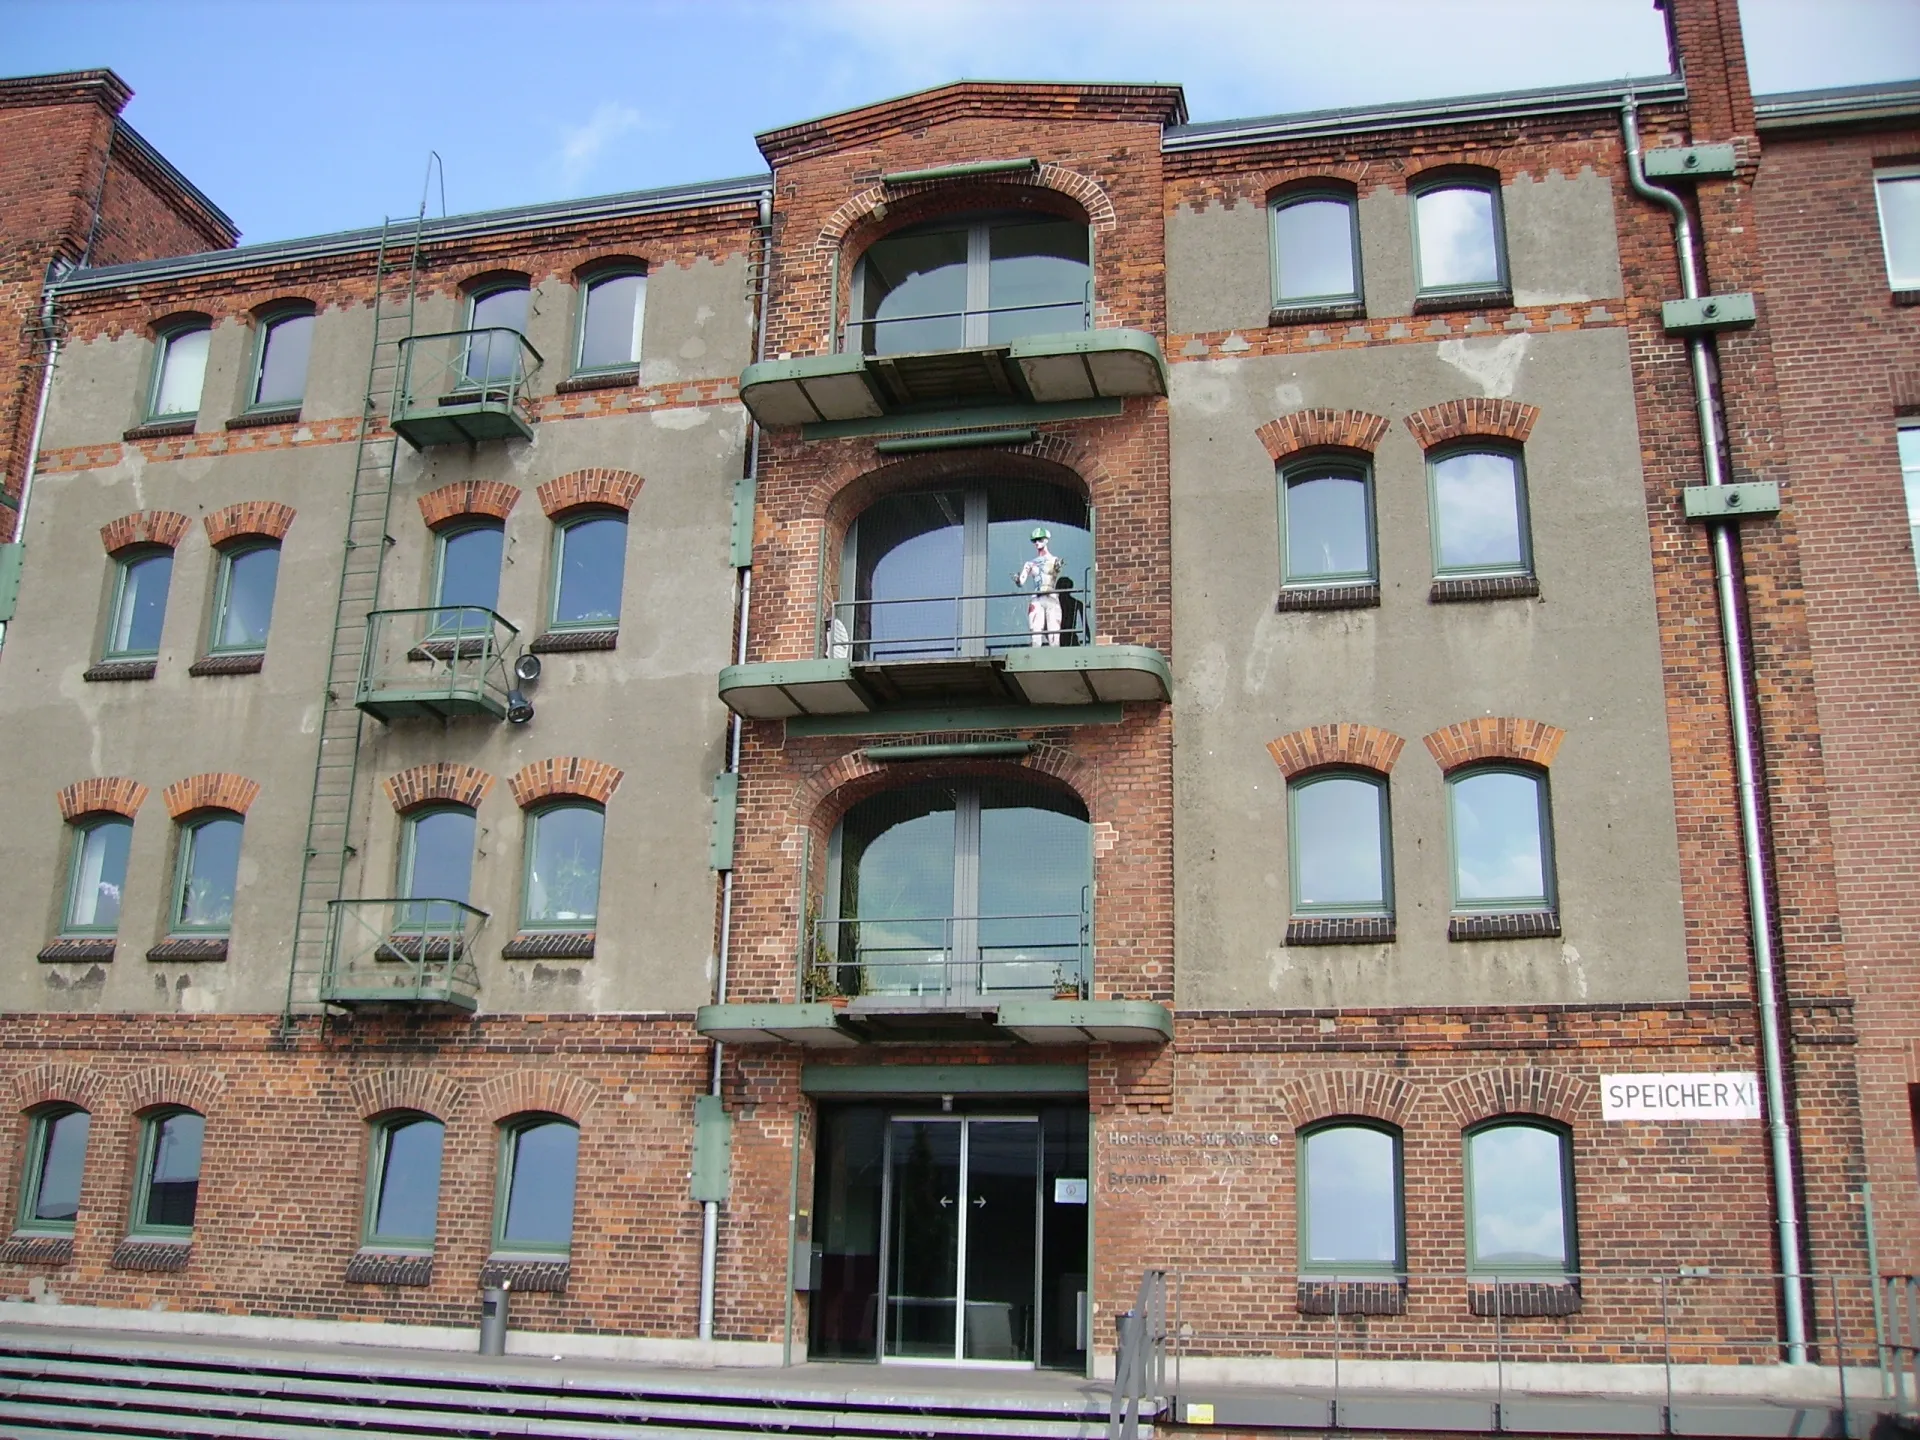 Photo showing: The University of the Arts in Bremen, located in the former warehouse "Speicher XI" in the port area